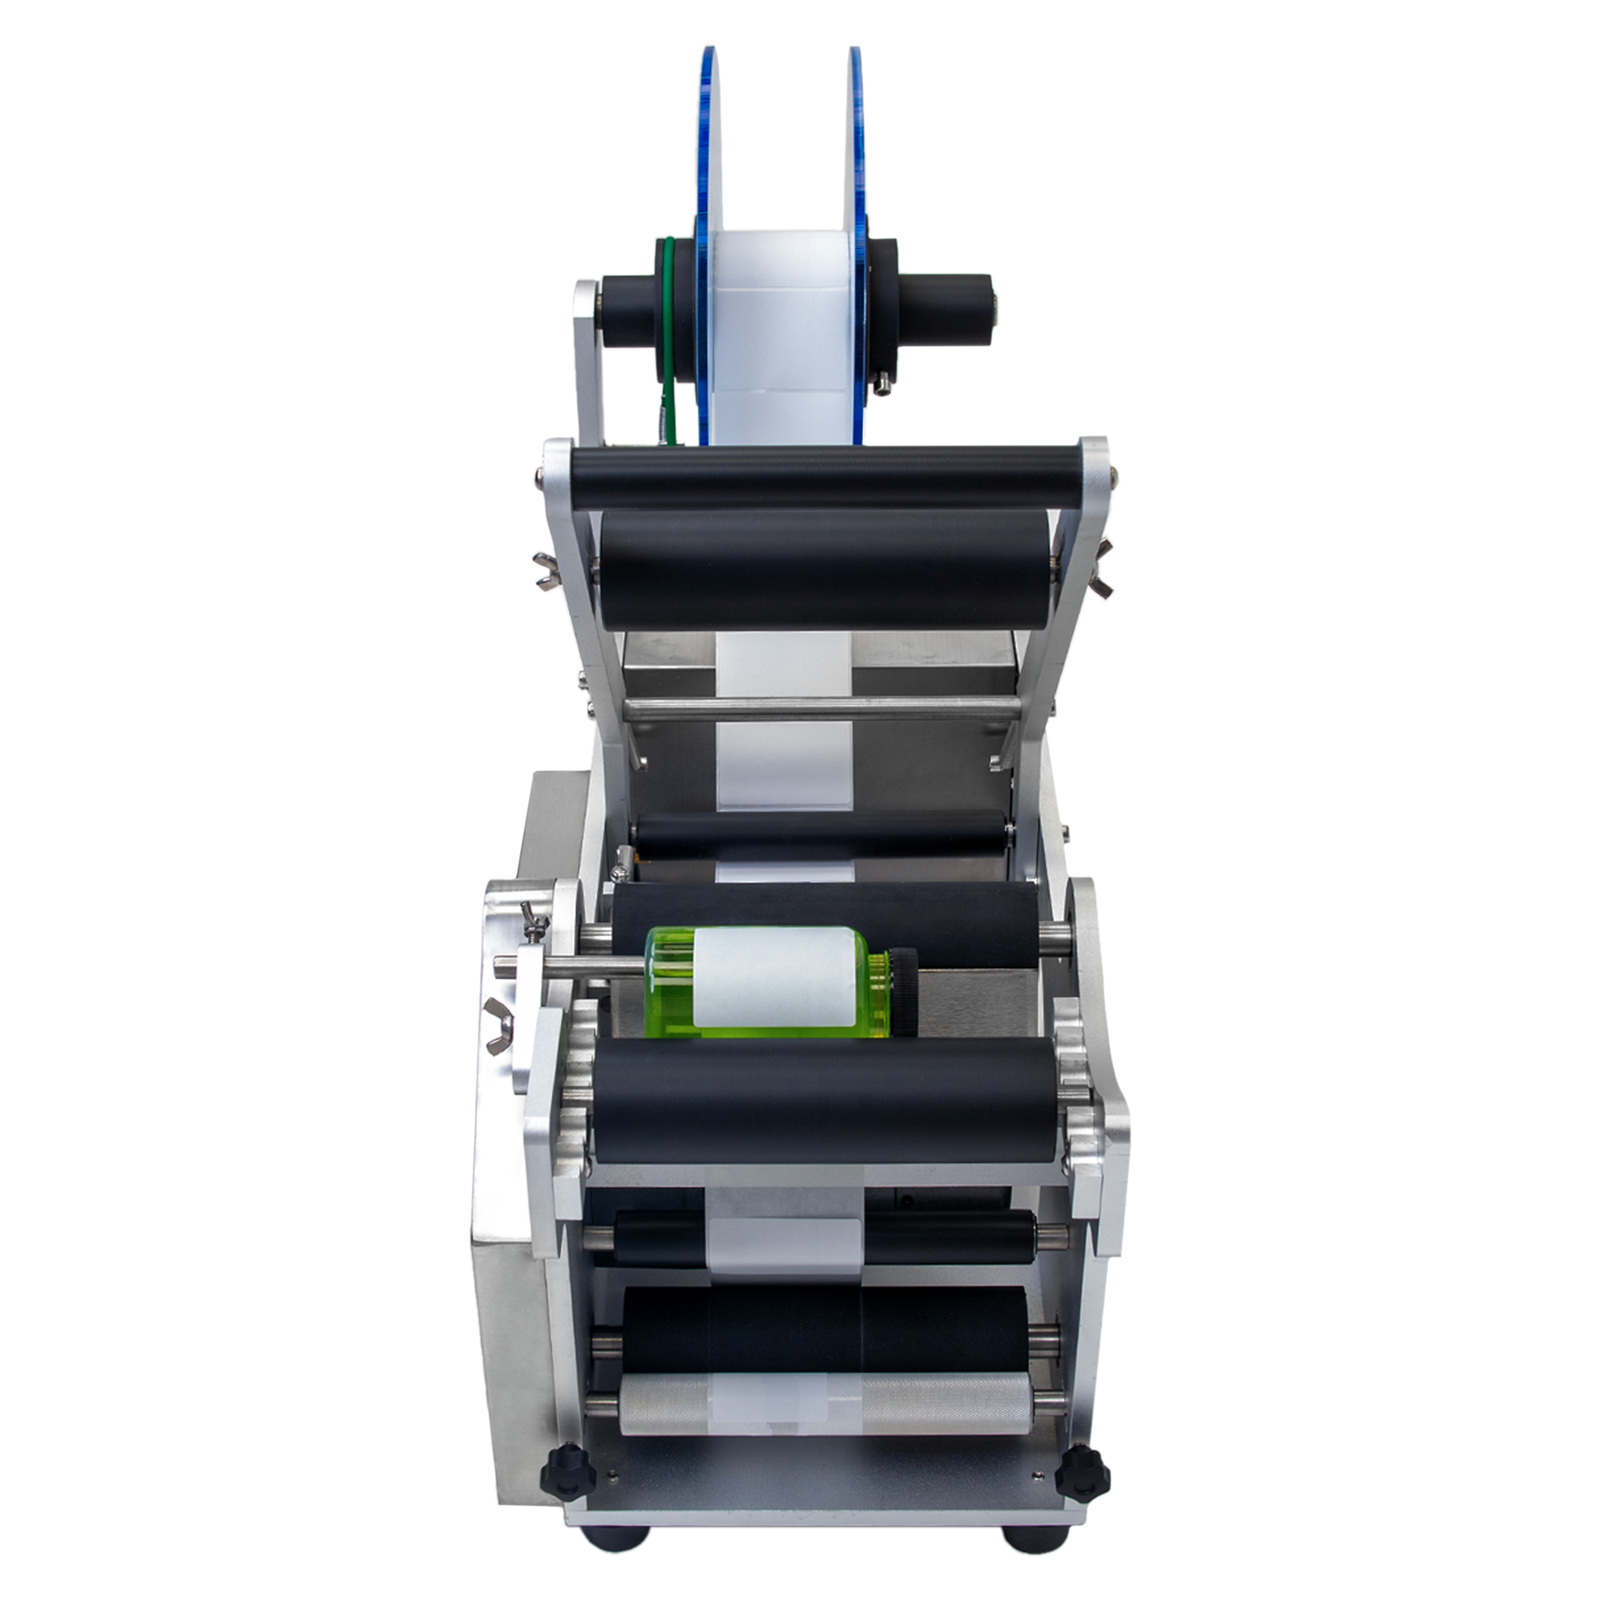 top view of the semi-automatic label applicator with a roll of white labels installed in the machine